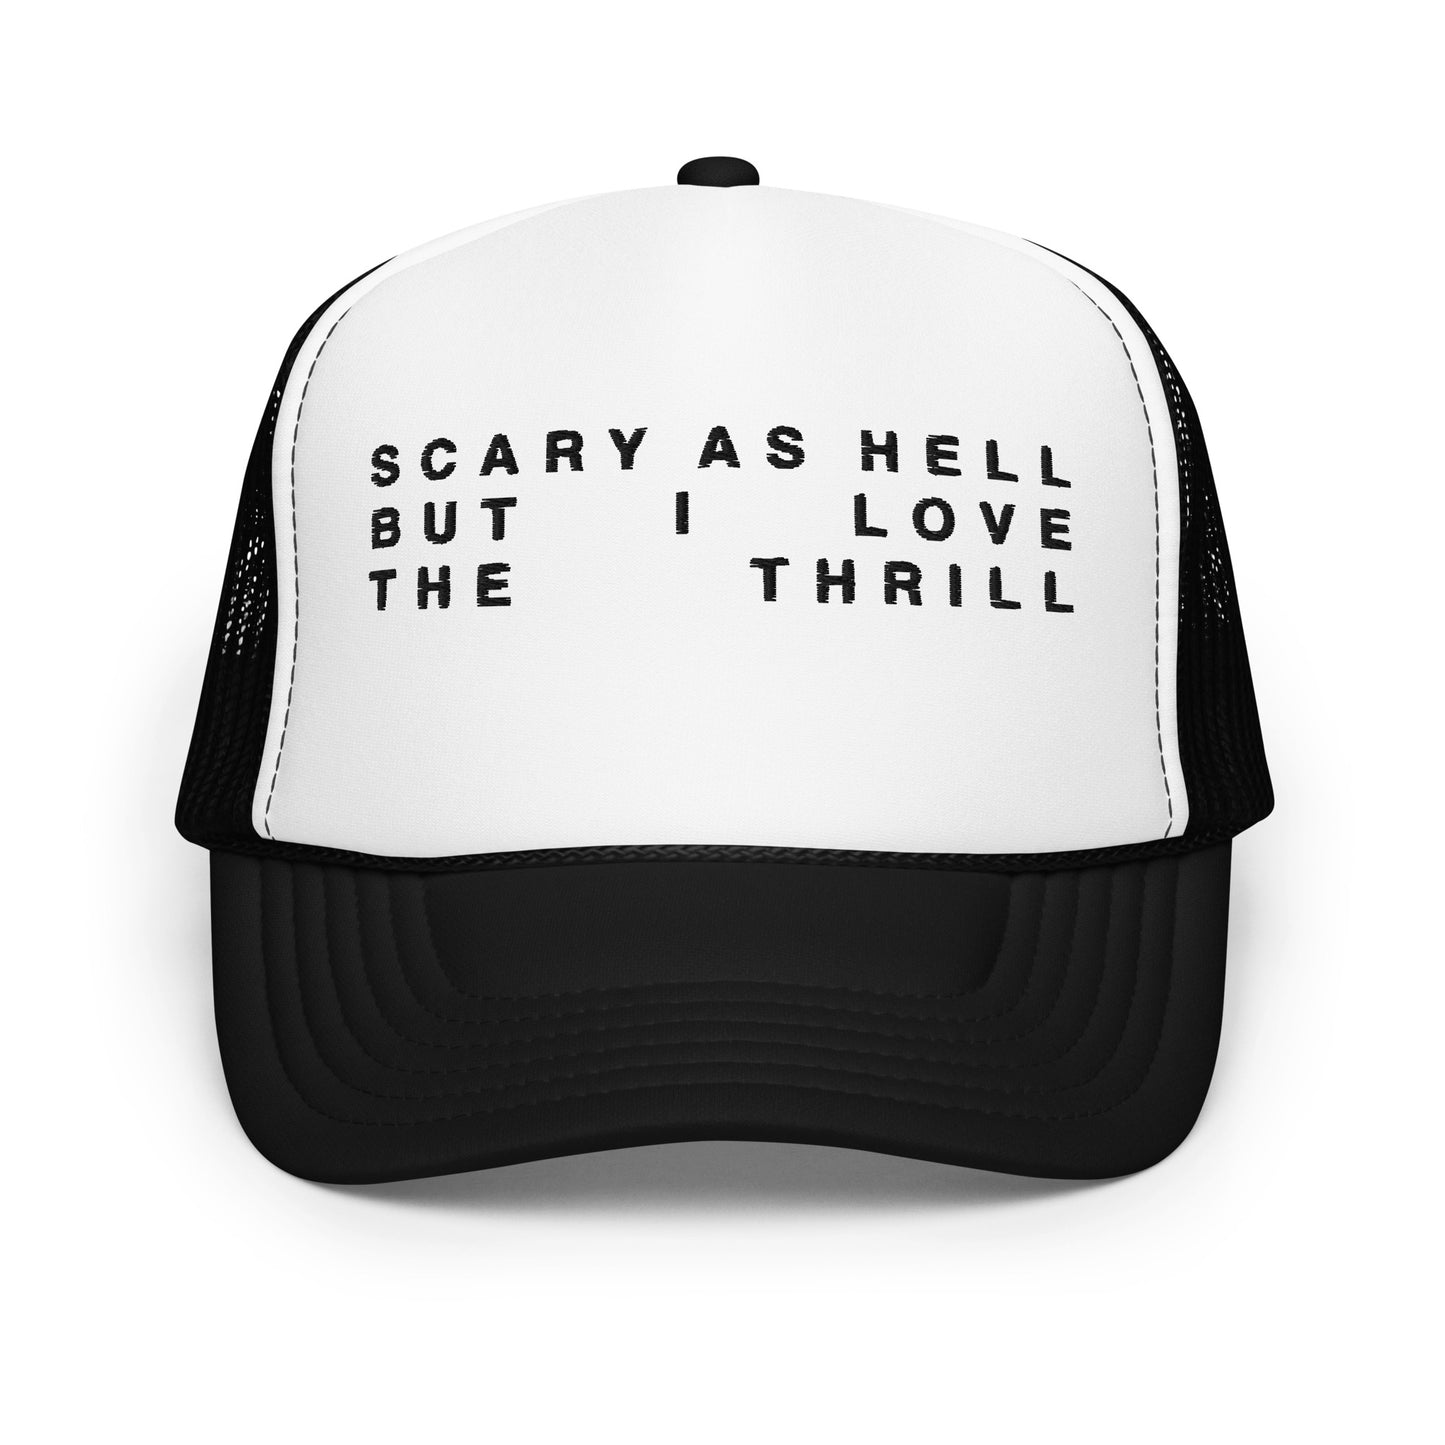 Scary As Hell But I Love The Thrill.- Foam trucker hat